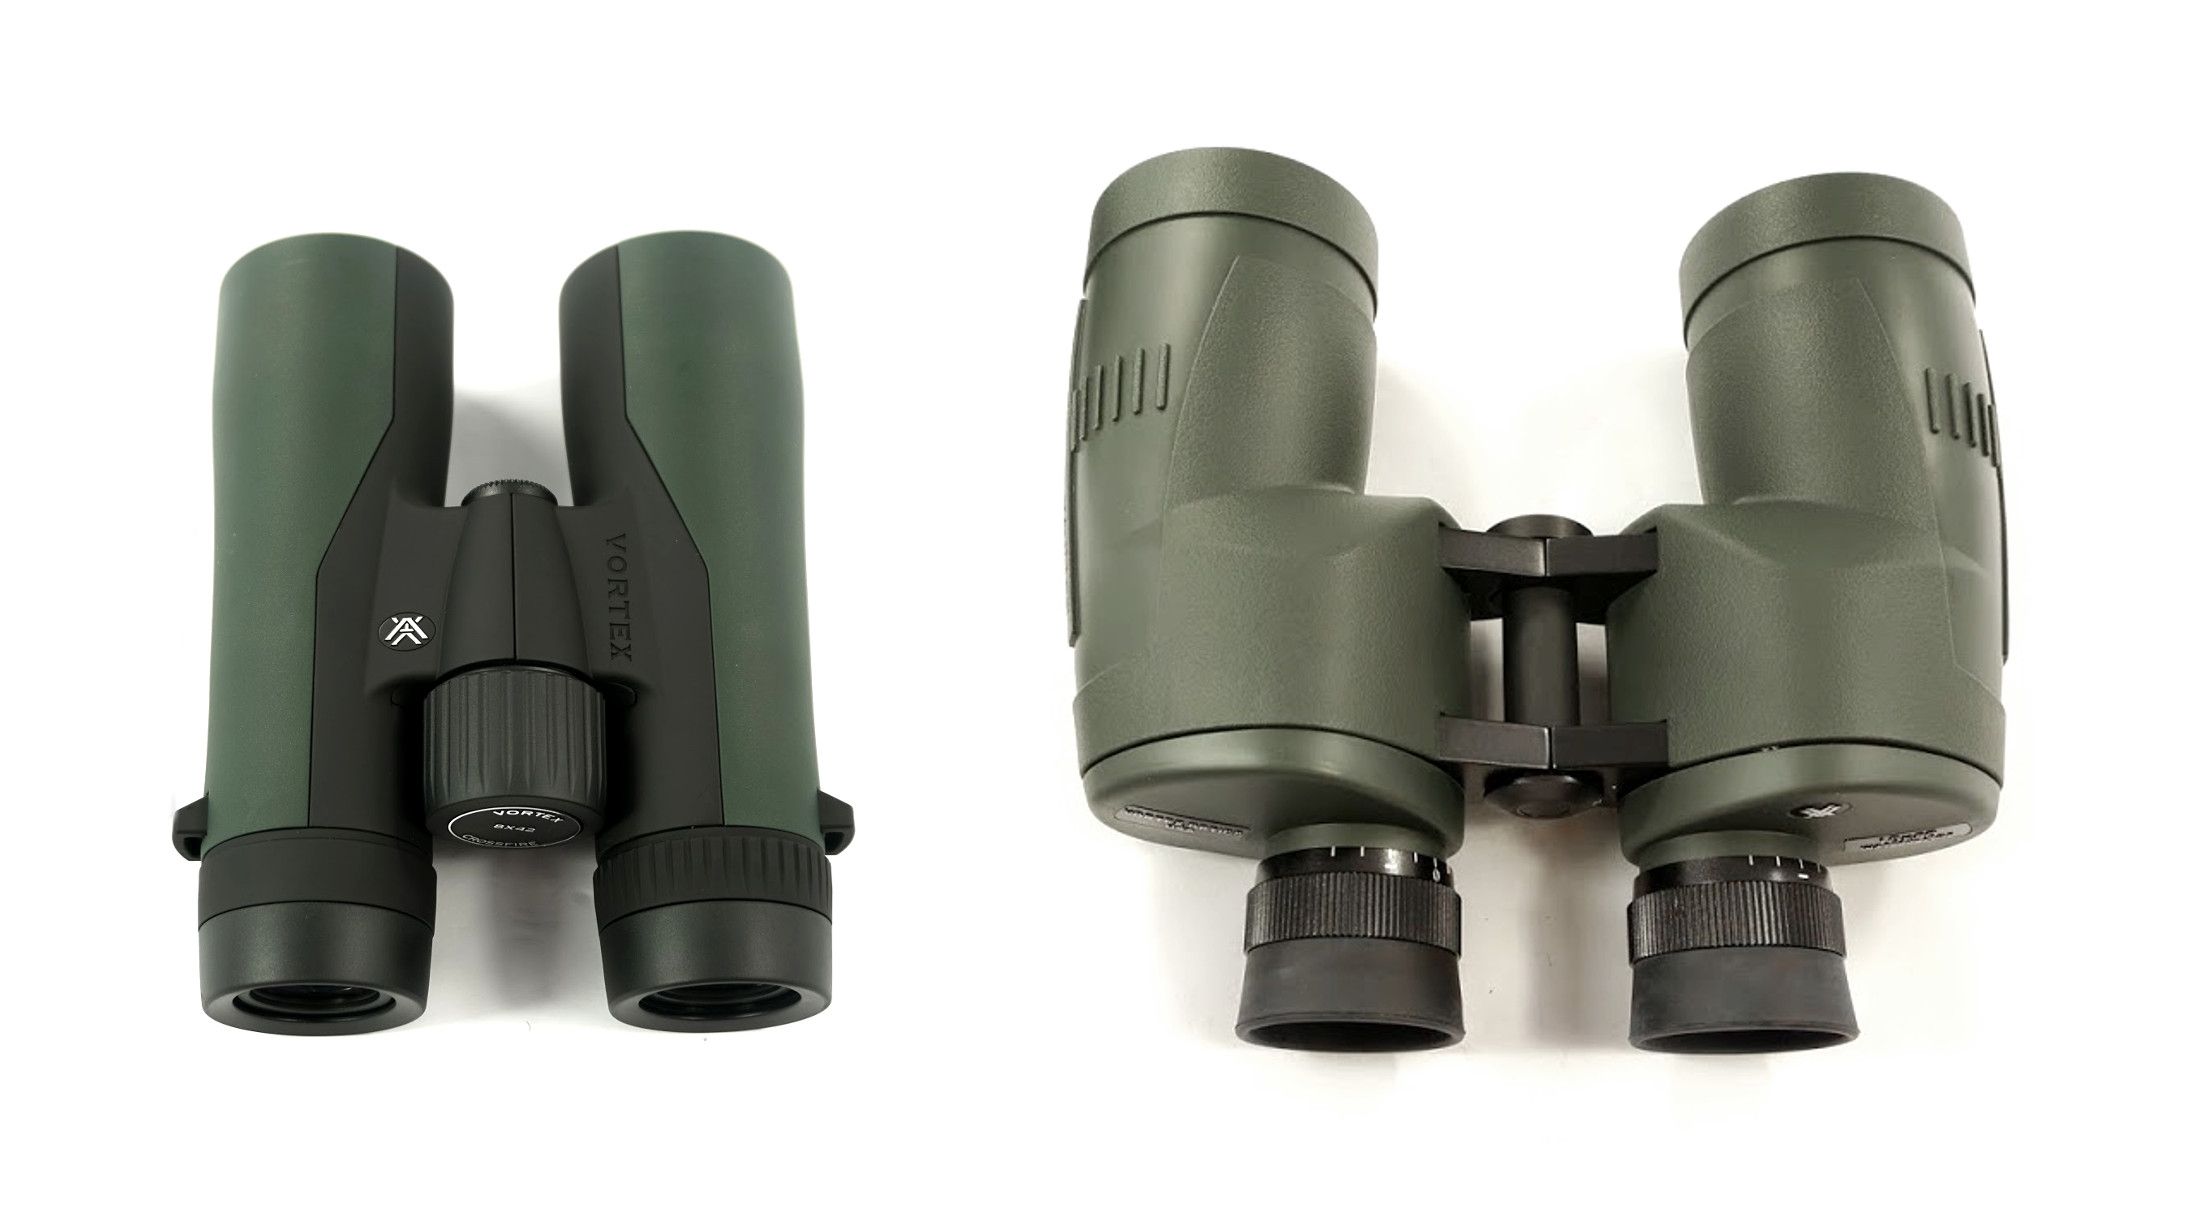 Binoculars with central focusing (left) and binoculars with individual focusing (right) Source: Optics Trade